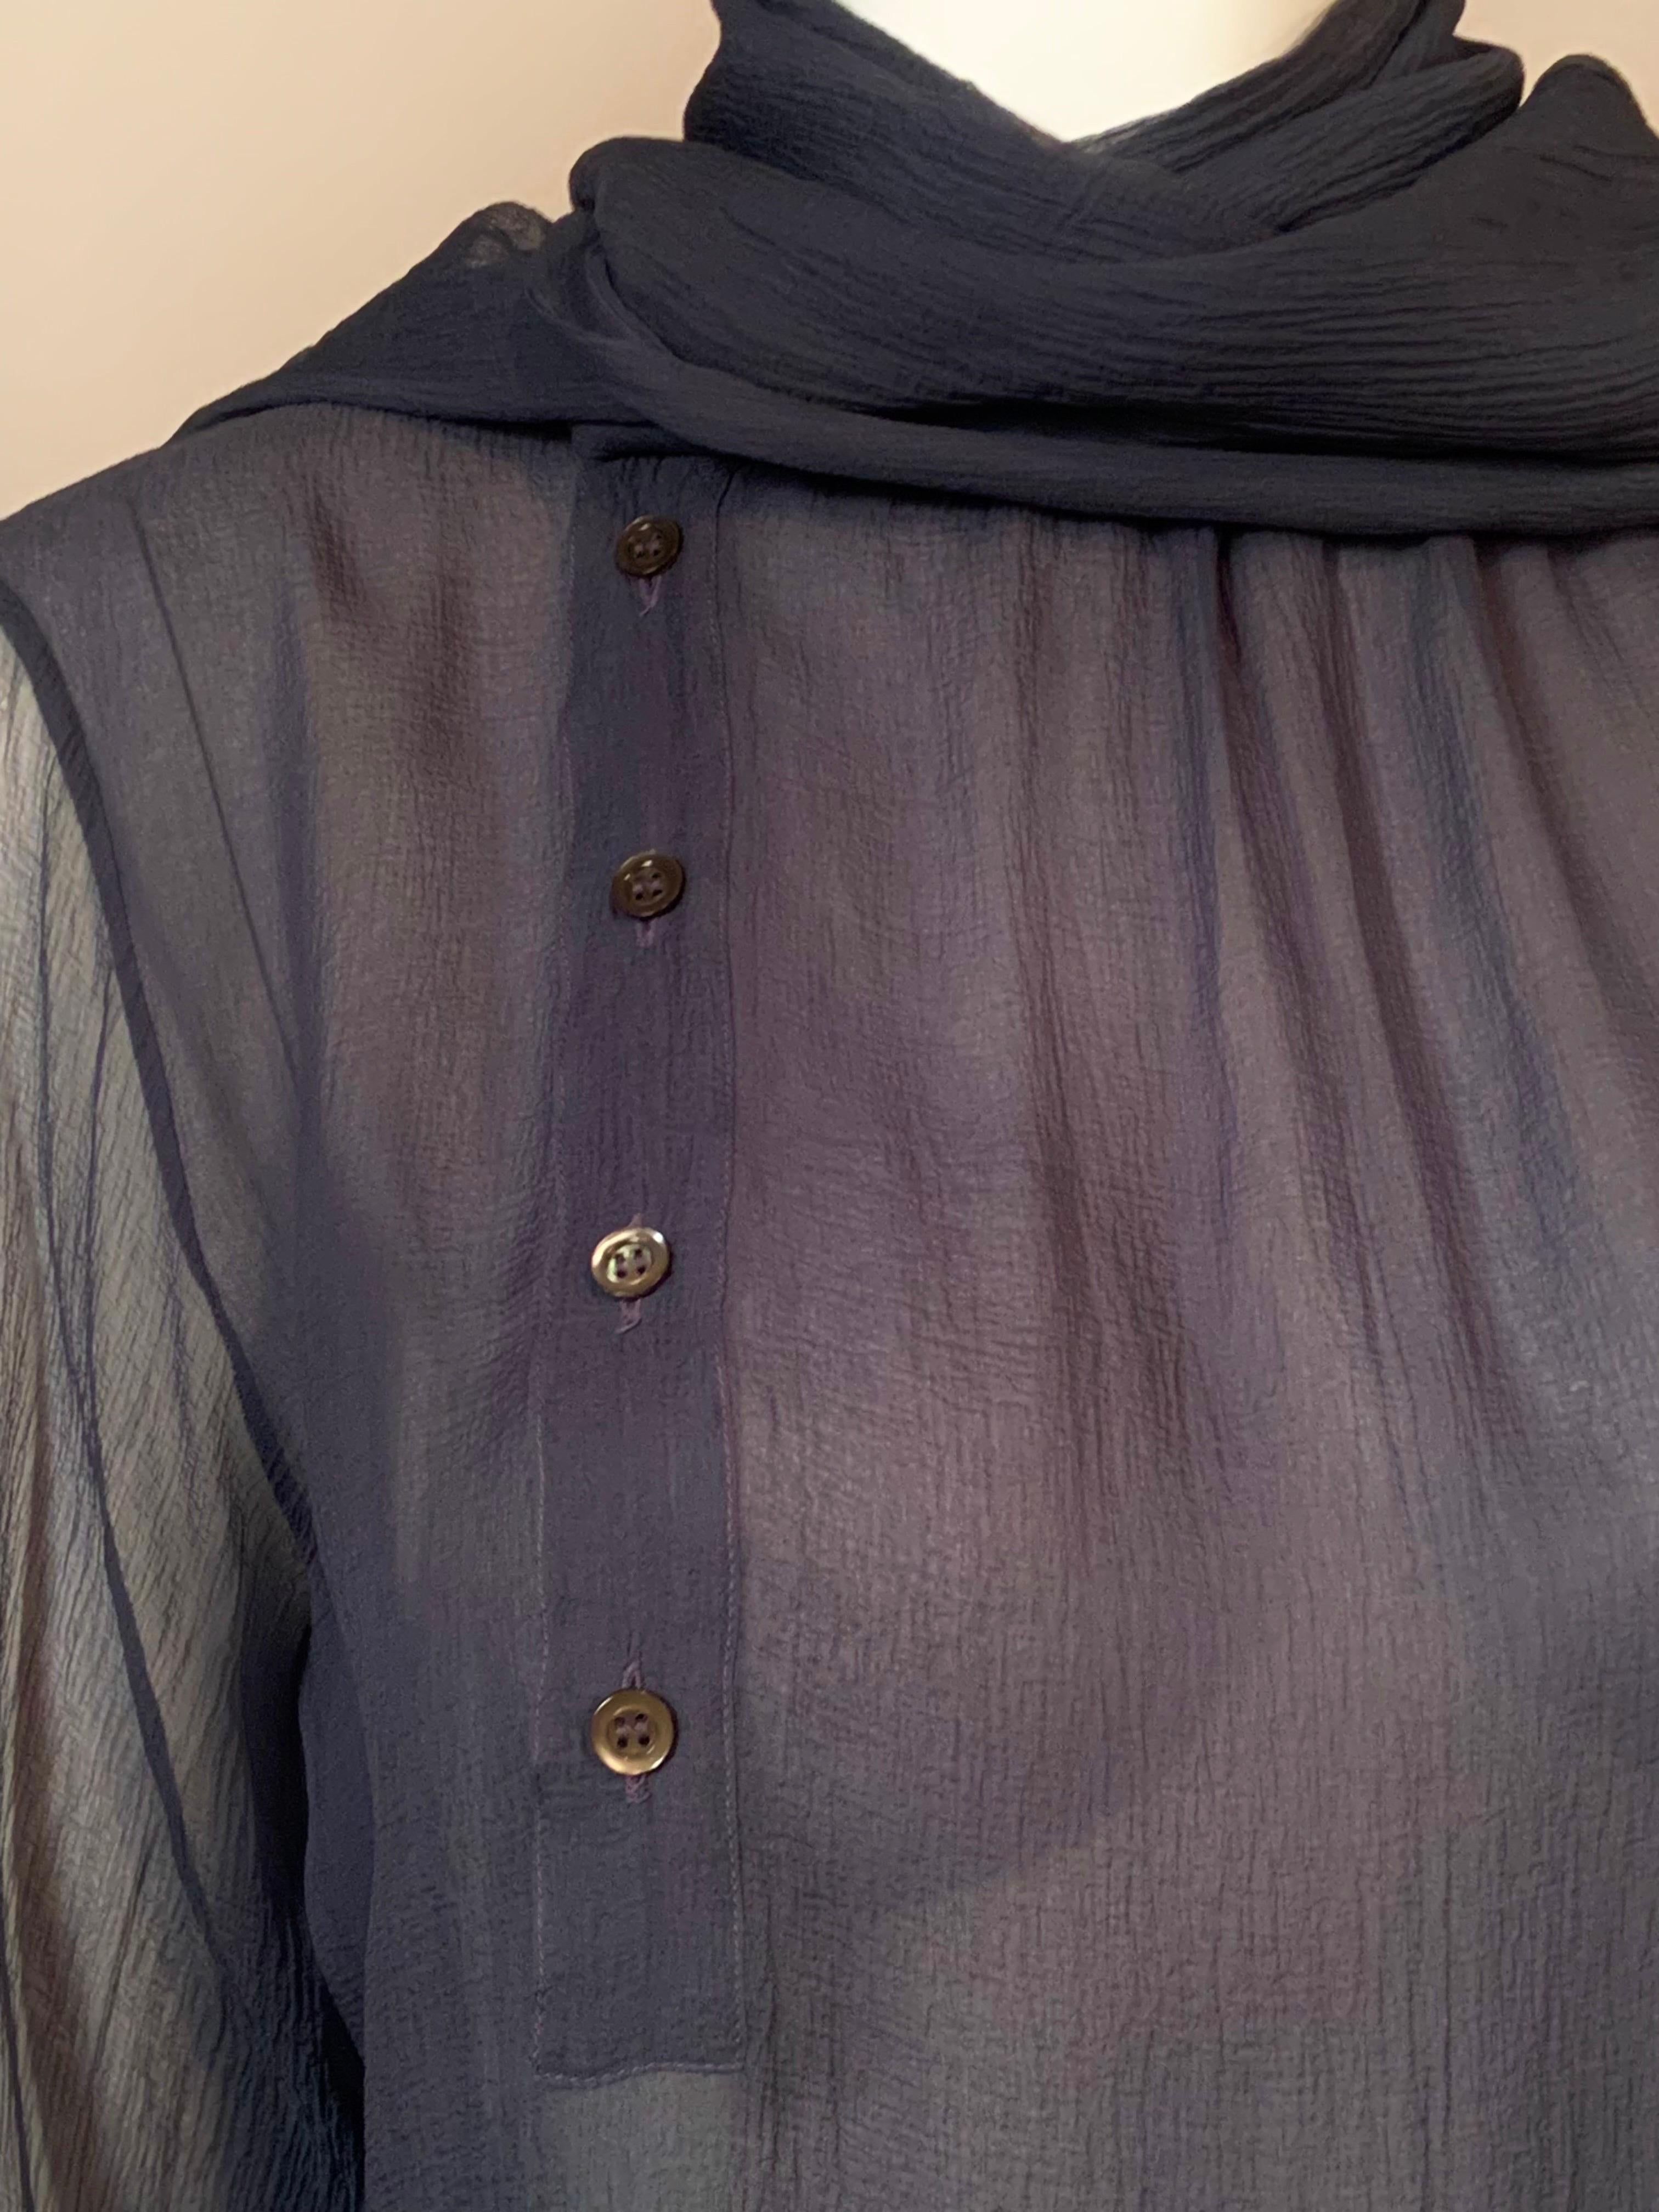 Yves Saint Laurent Sheer Slate Blue Silk Georgette Blouse In Excellent Condition For Sale In New Hope, PA